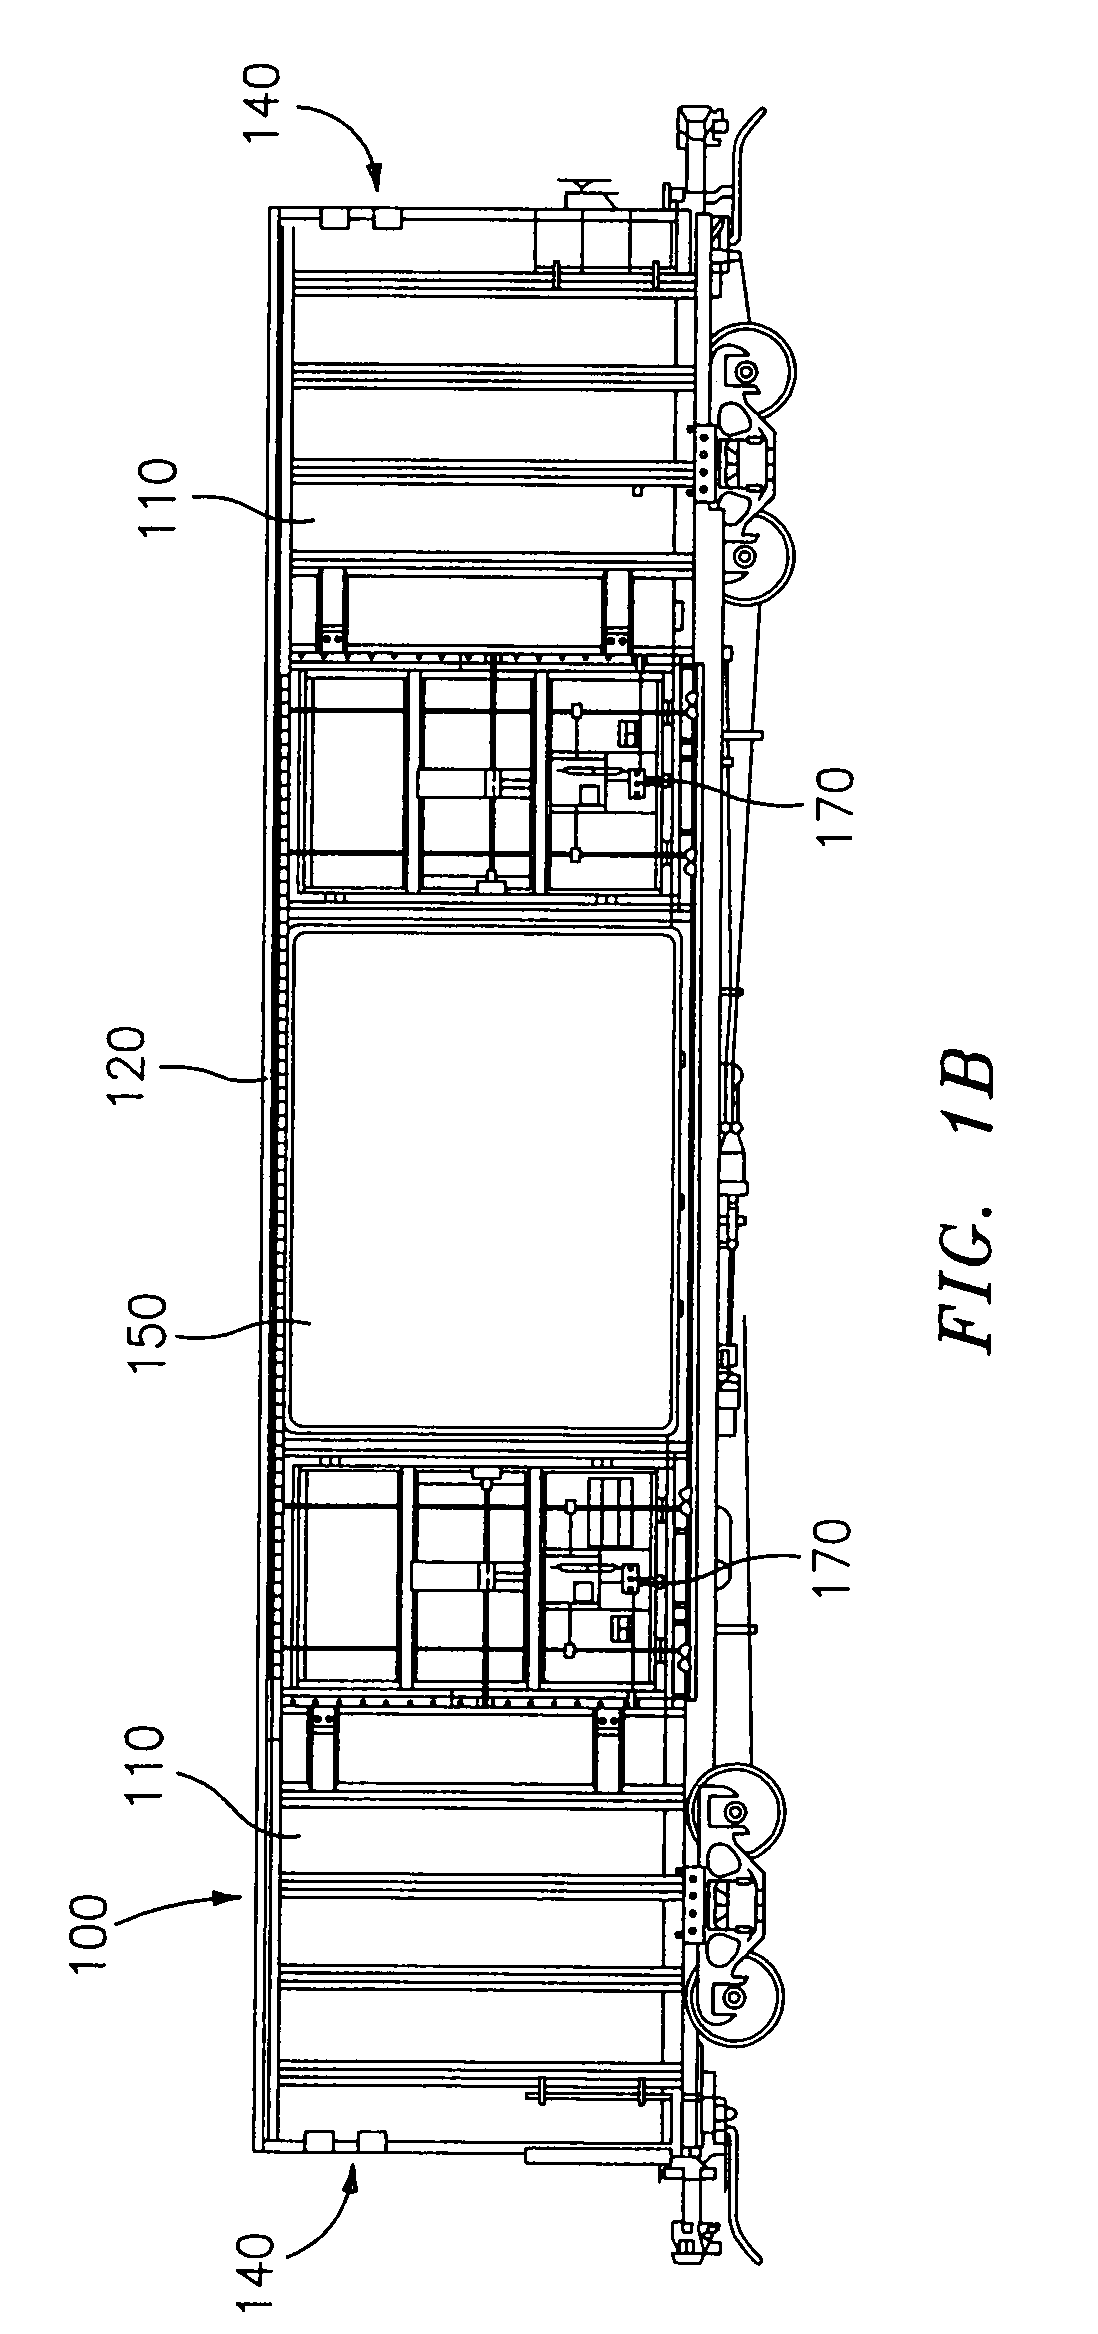 Insulated cargo container and methods for manufacturing same using vacuum insulated panels and foam insulated liners